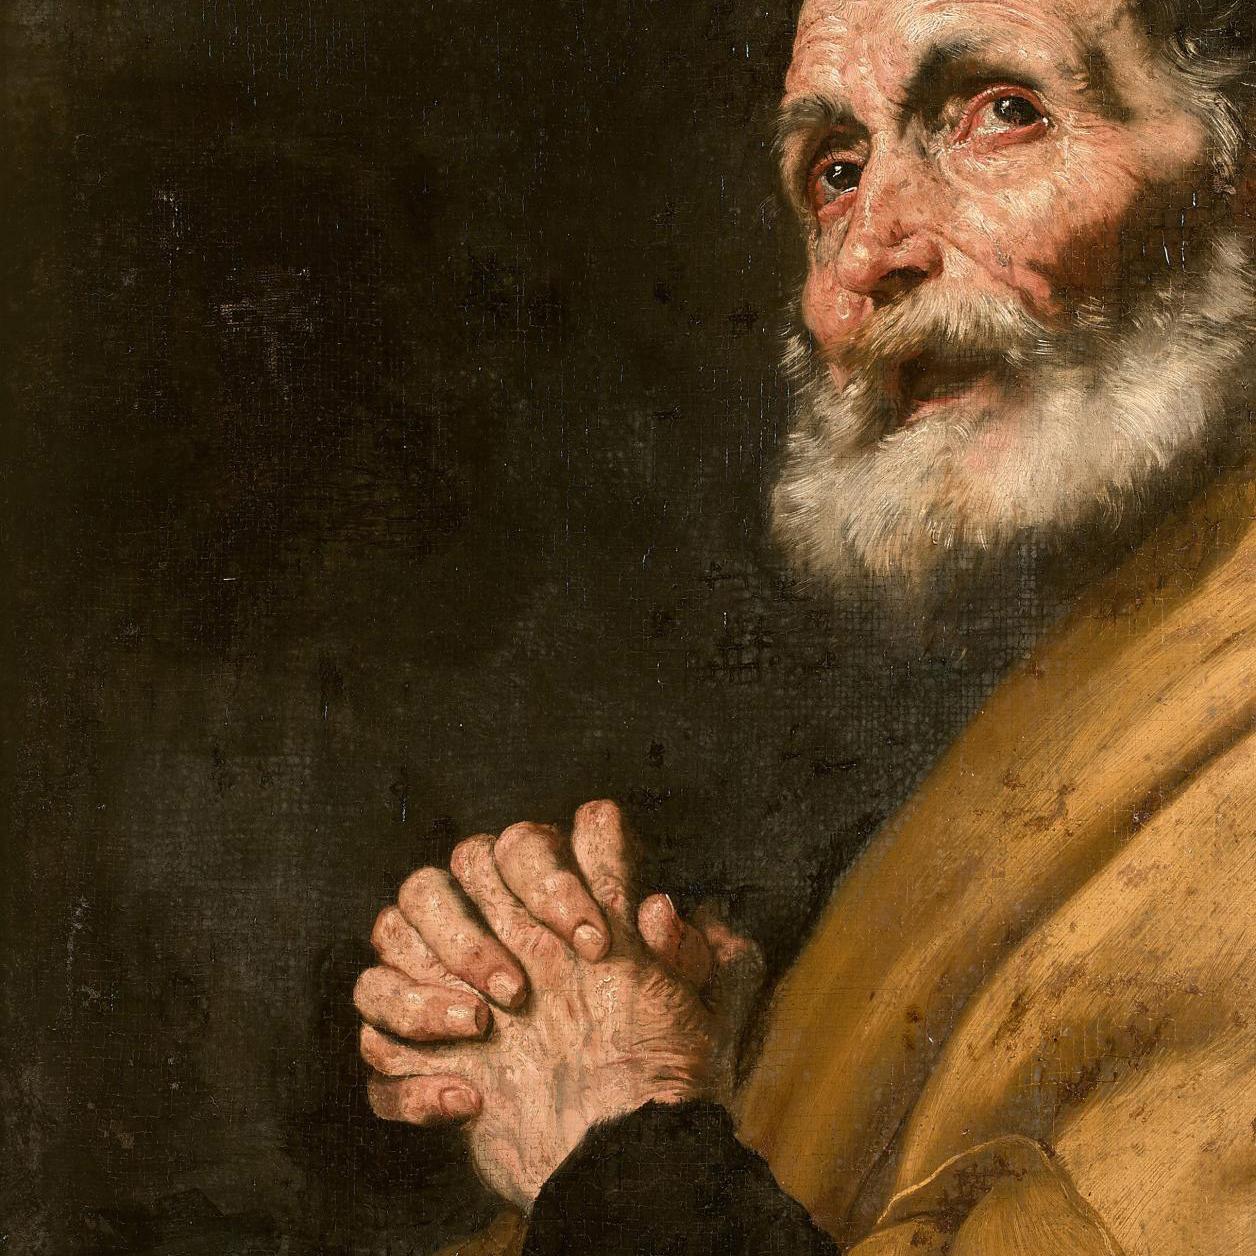 Pre-sale - First Appearance at Auction of a "Saint Peter" by Jusepe de Ribera